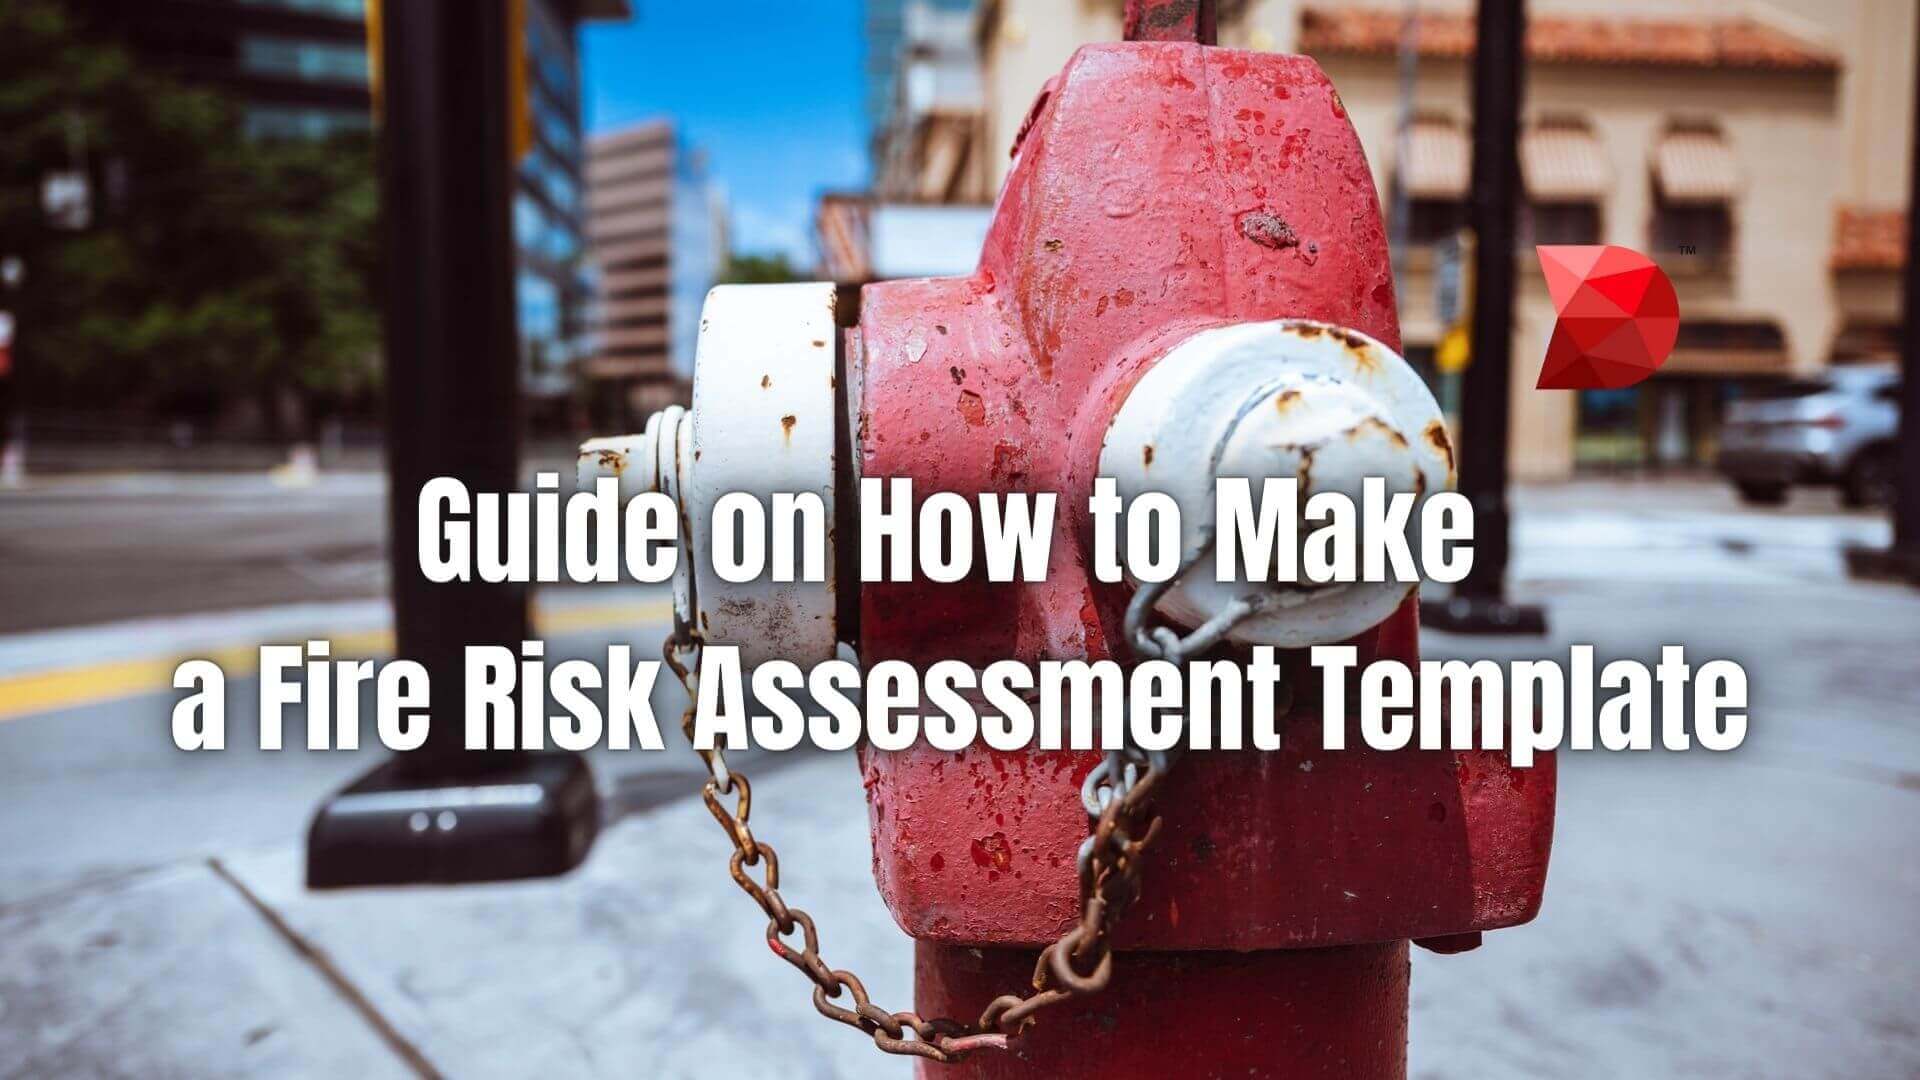 Guide on How to Make a Fire Risk Assessment Template